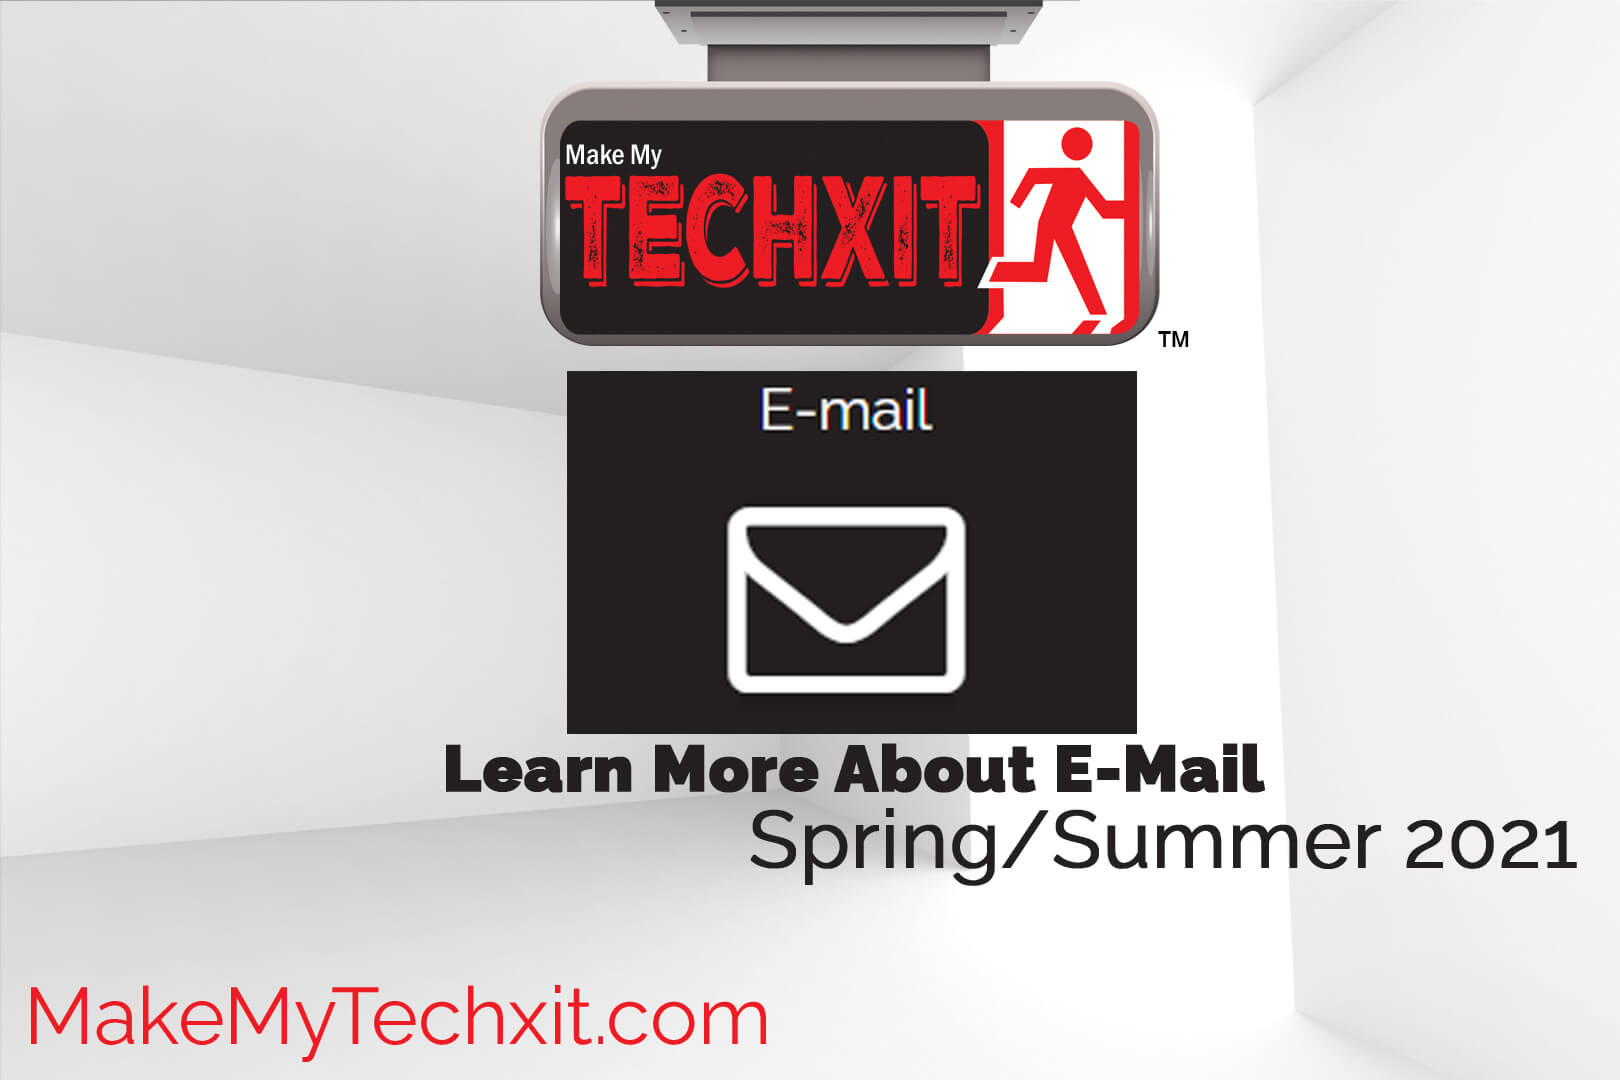 https://www.makemytechxit.com/learn-more-about-e-mail.php